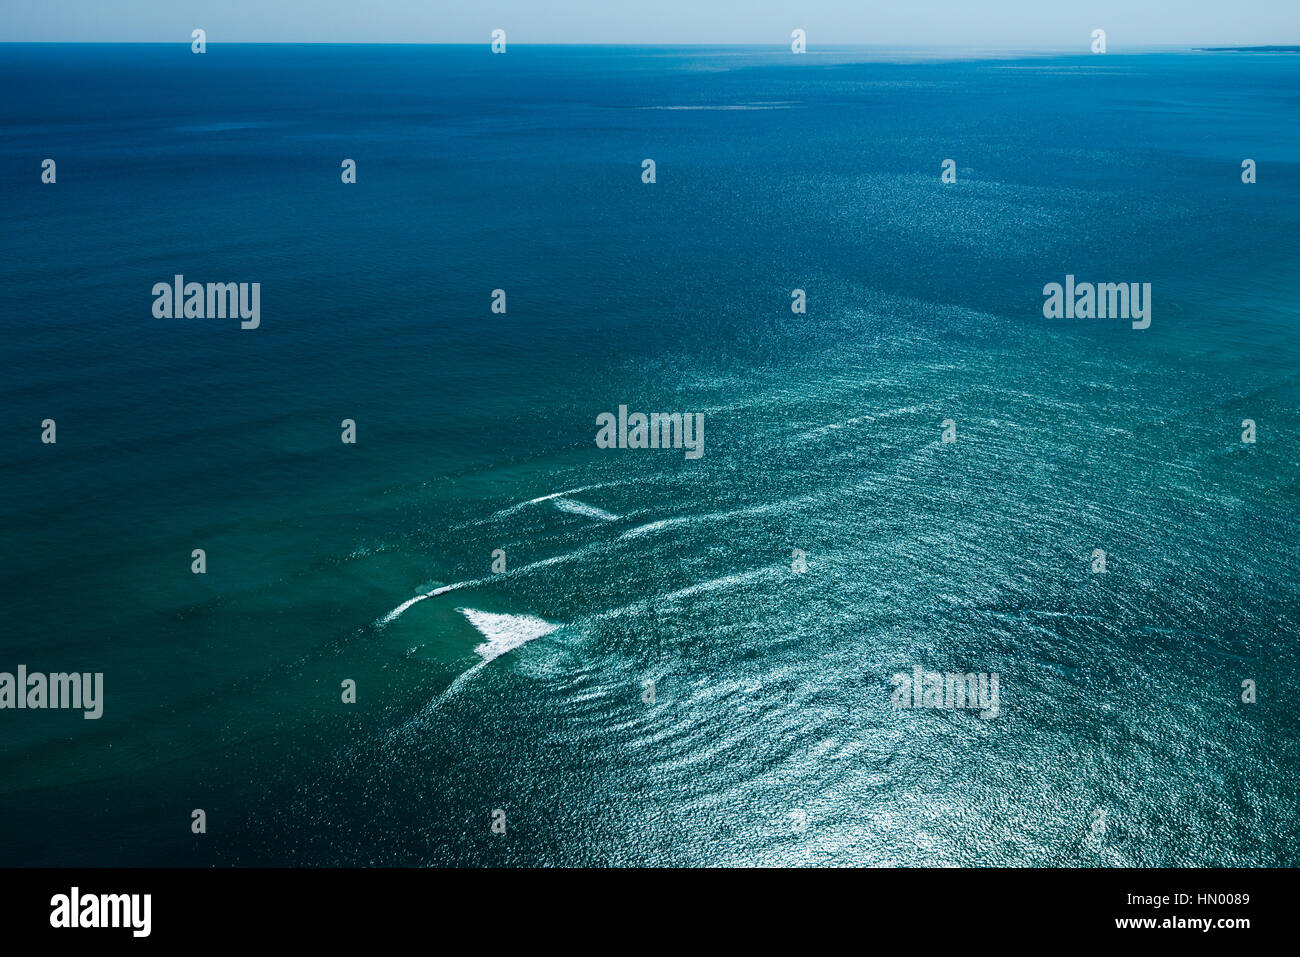 A wave breaks on a sand bar in the ocean. Stock Photo